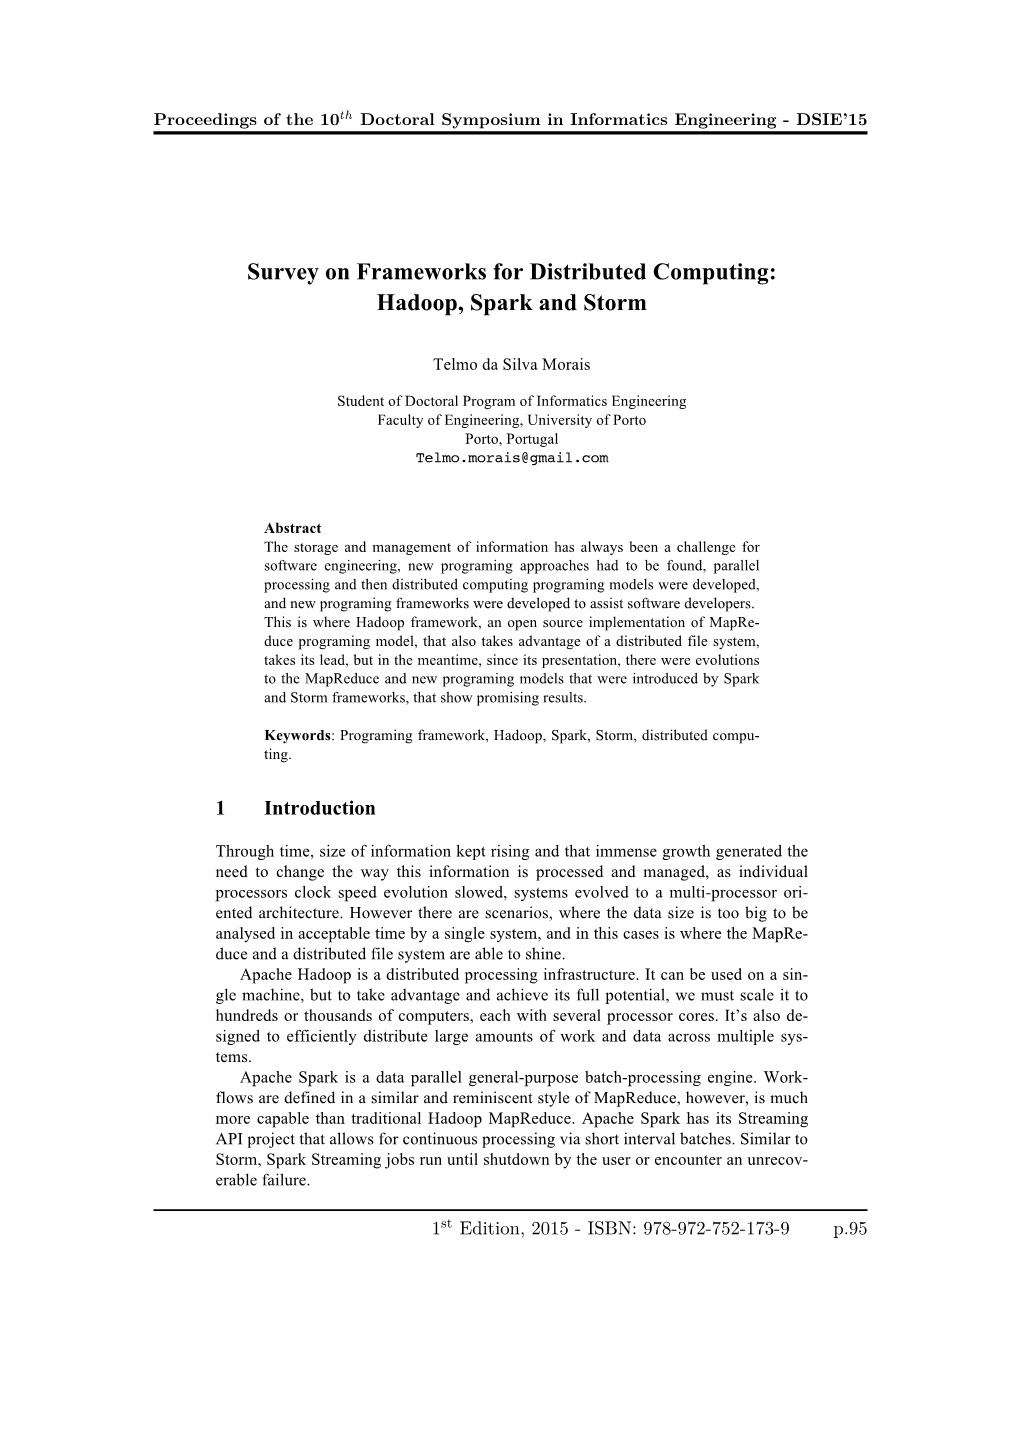 Survey on Frameworks for Distributed Computing: Hadoop, Spark and Storm